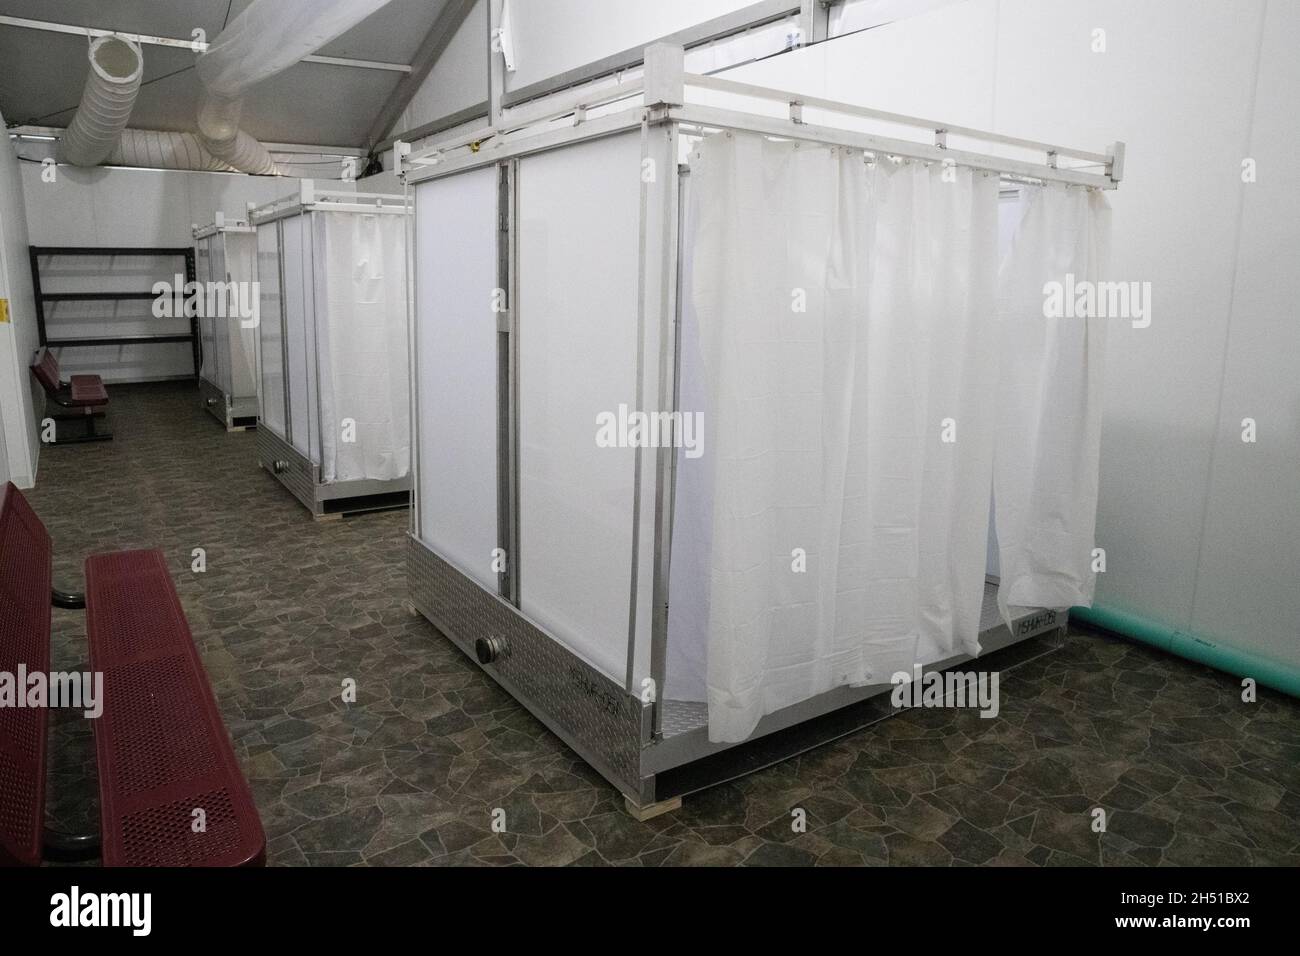 Donna, United States. 27 April, 2021. Shower facilities for unaccompanied migrant children at the U.S. Customs and Border Patrol immigration processing center May 7, 2021 in Donna, Texas.  Credit: Michael Battise/Homeland Security/Alamy Live News Stock Photo